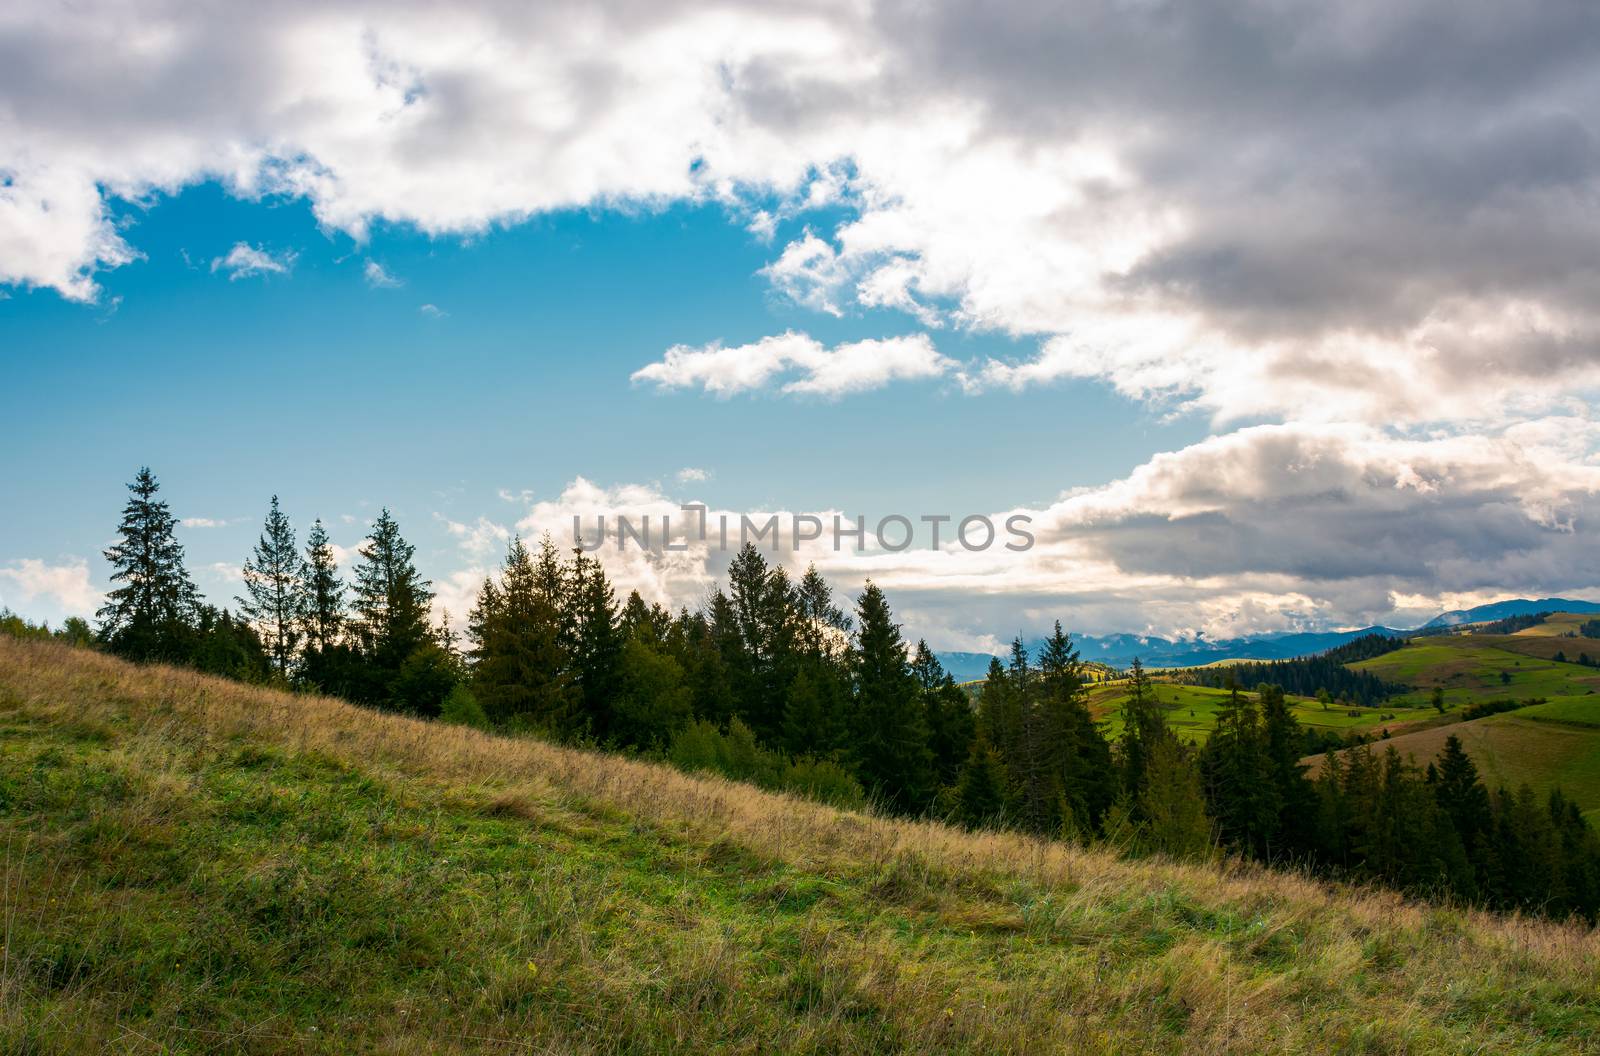 forested grassy hills on a cloudy day. lovely landscape of Carpathian mountains in autumn